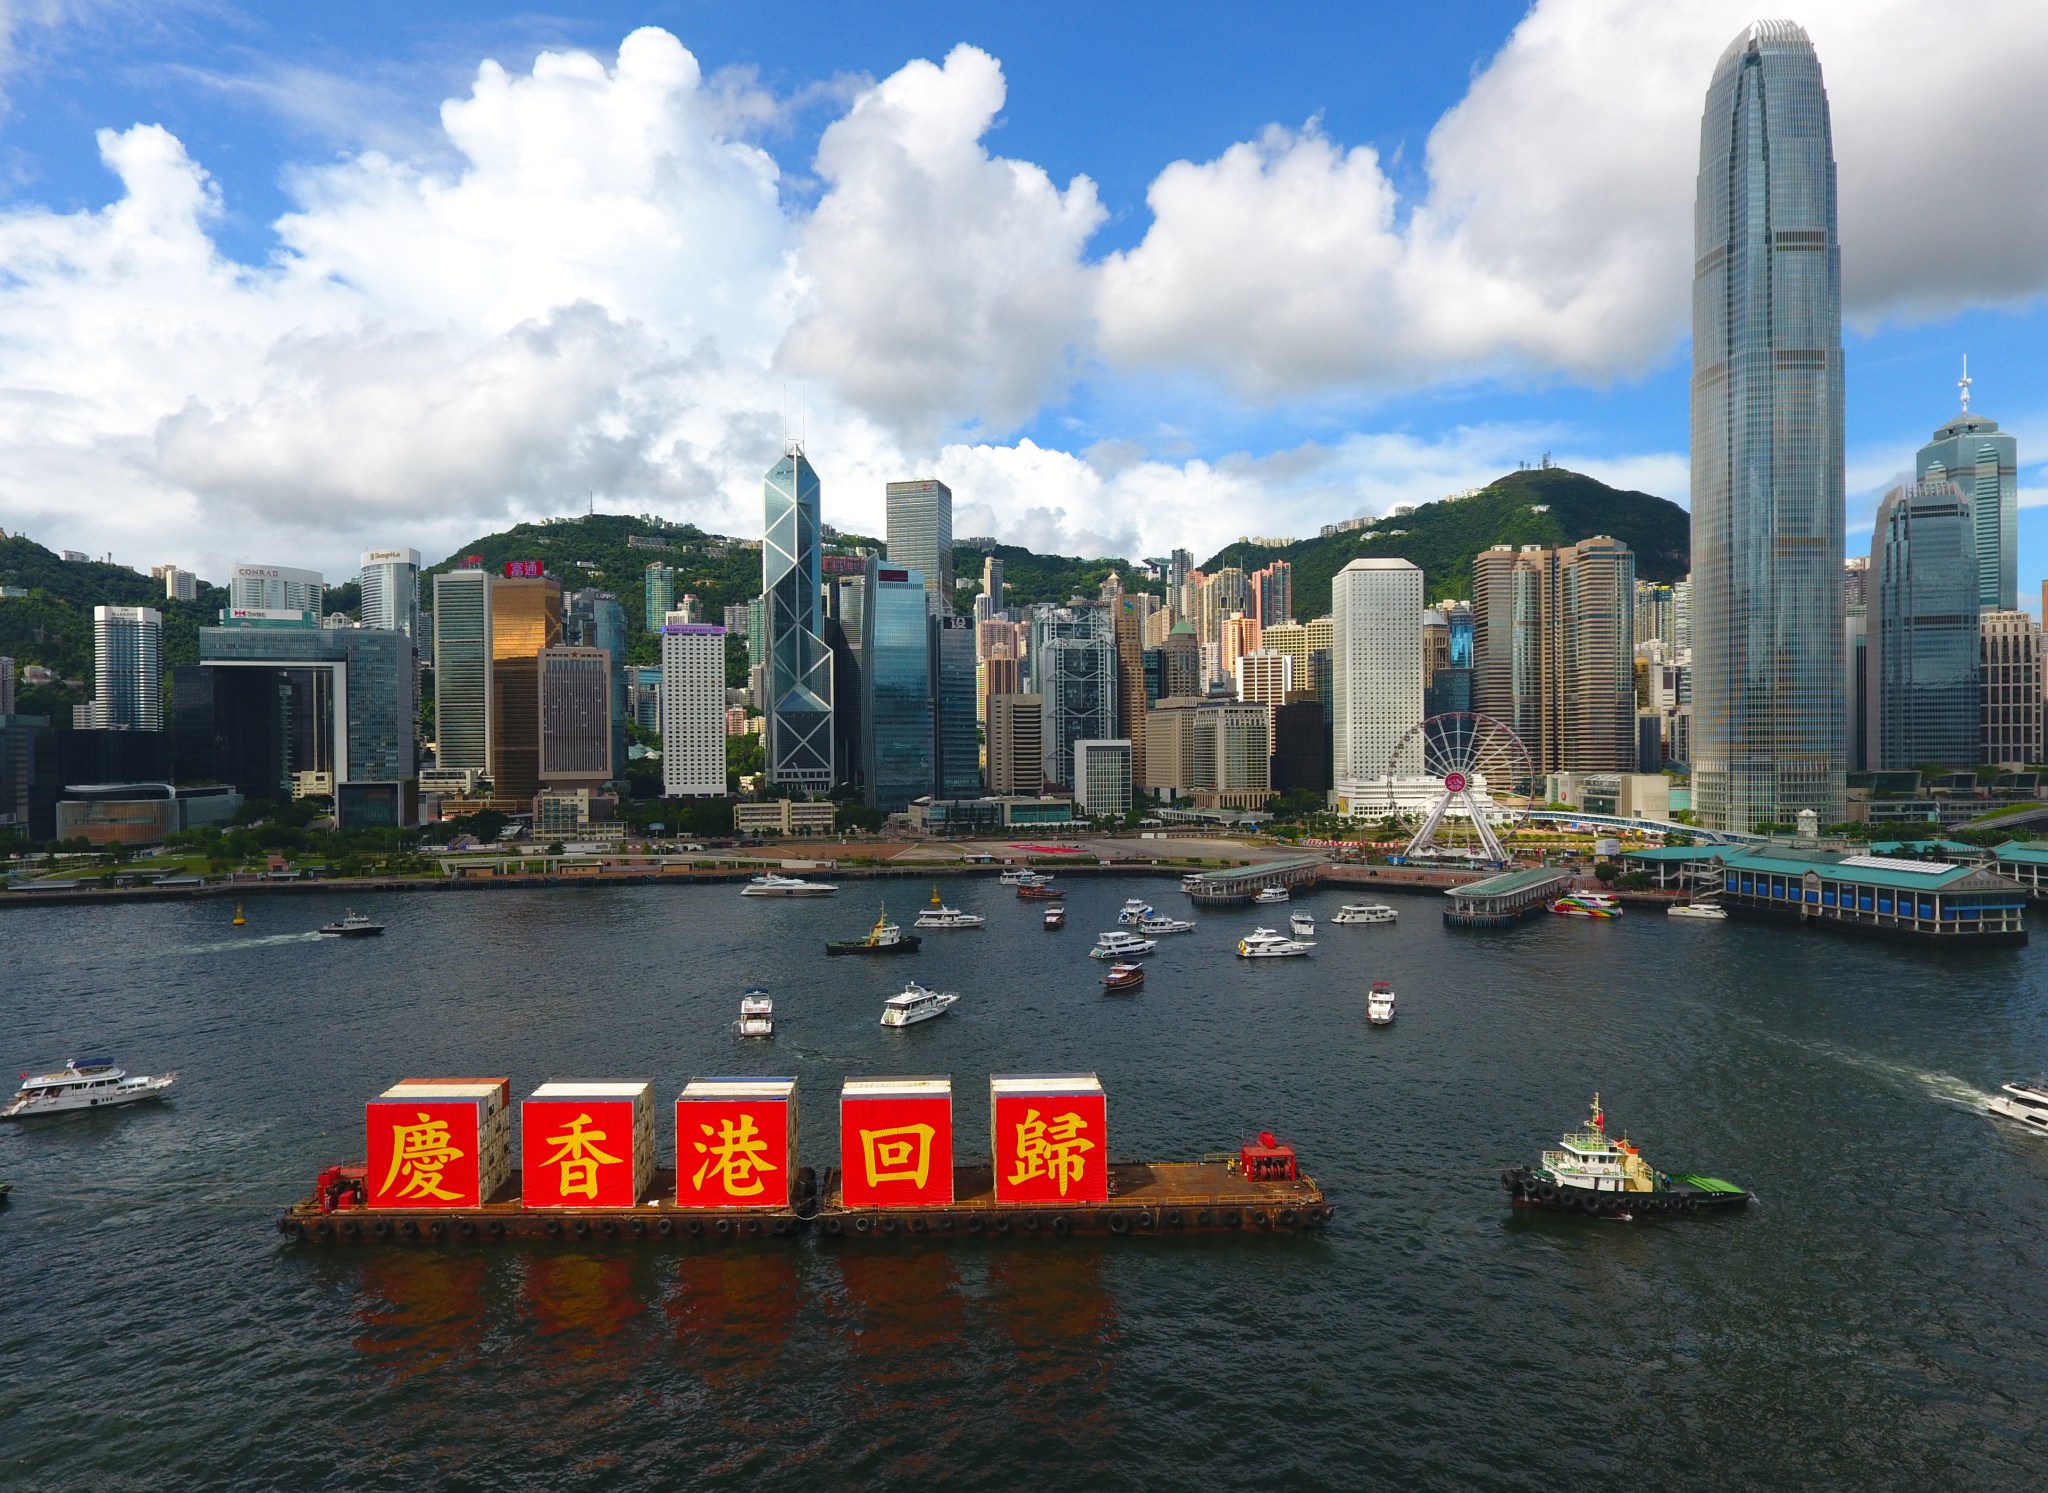 A ship carrying the slogan of "Celebrating the 23rd anniversary of Hong Kong's return to the motherland" sails at the Victoria Harbour in Hong Kong, south China, July 1, 2020.